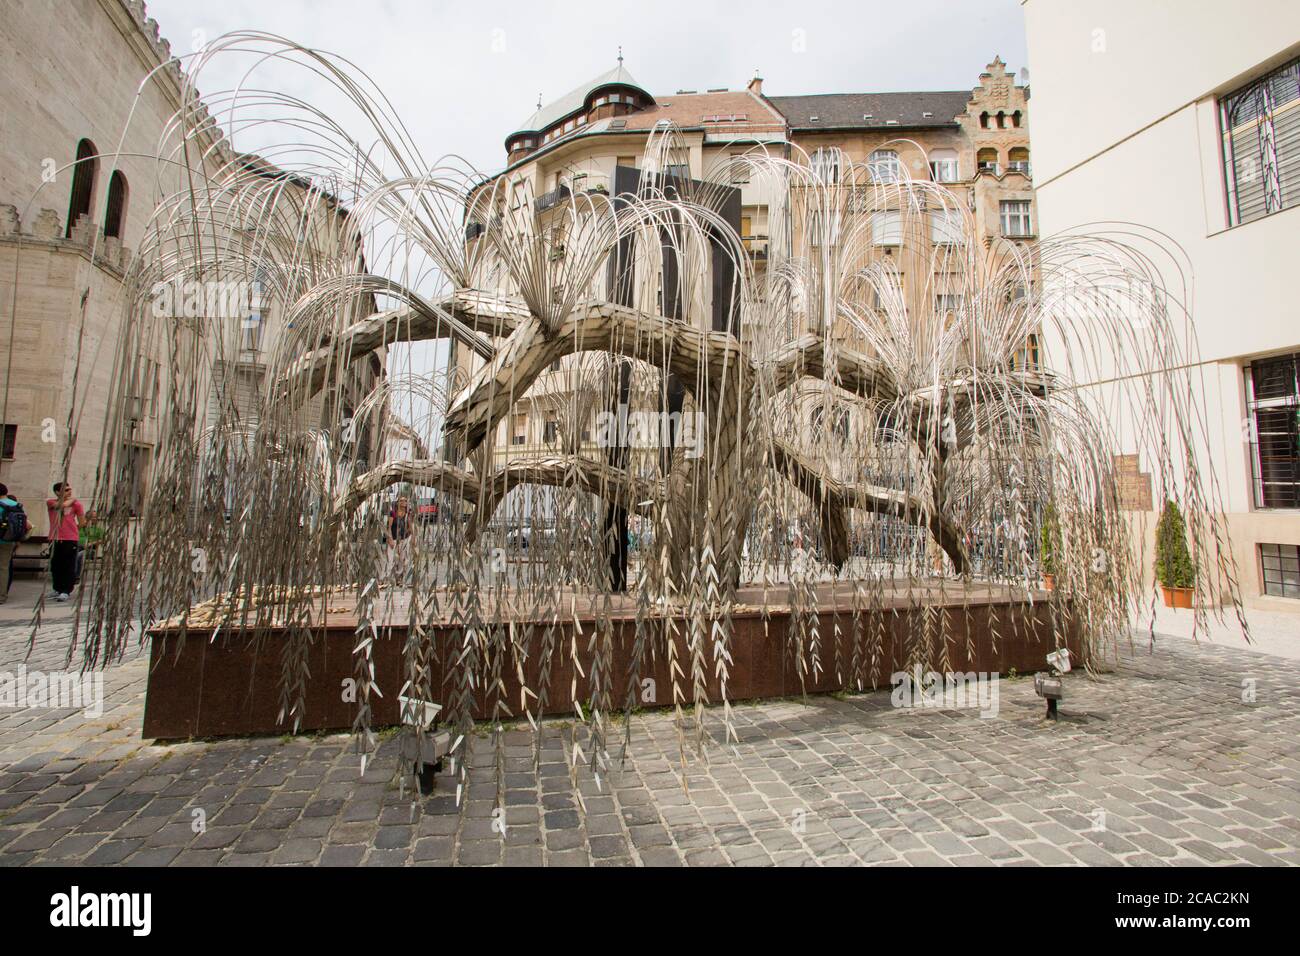 The Weeping Willow Sculpture in the Memorial Garden of the Great Synagogue in Budapest Stock Photo